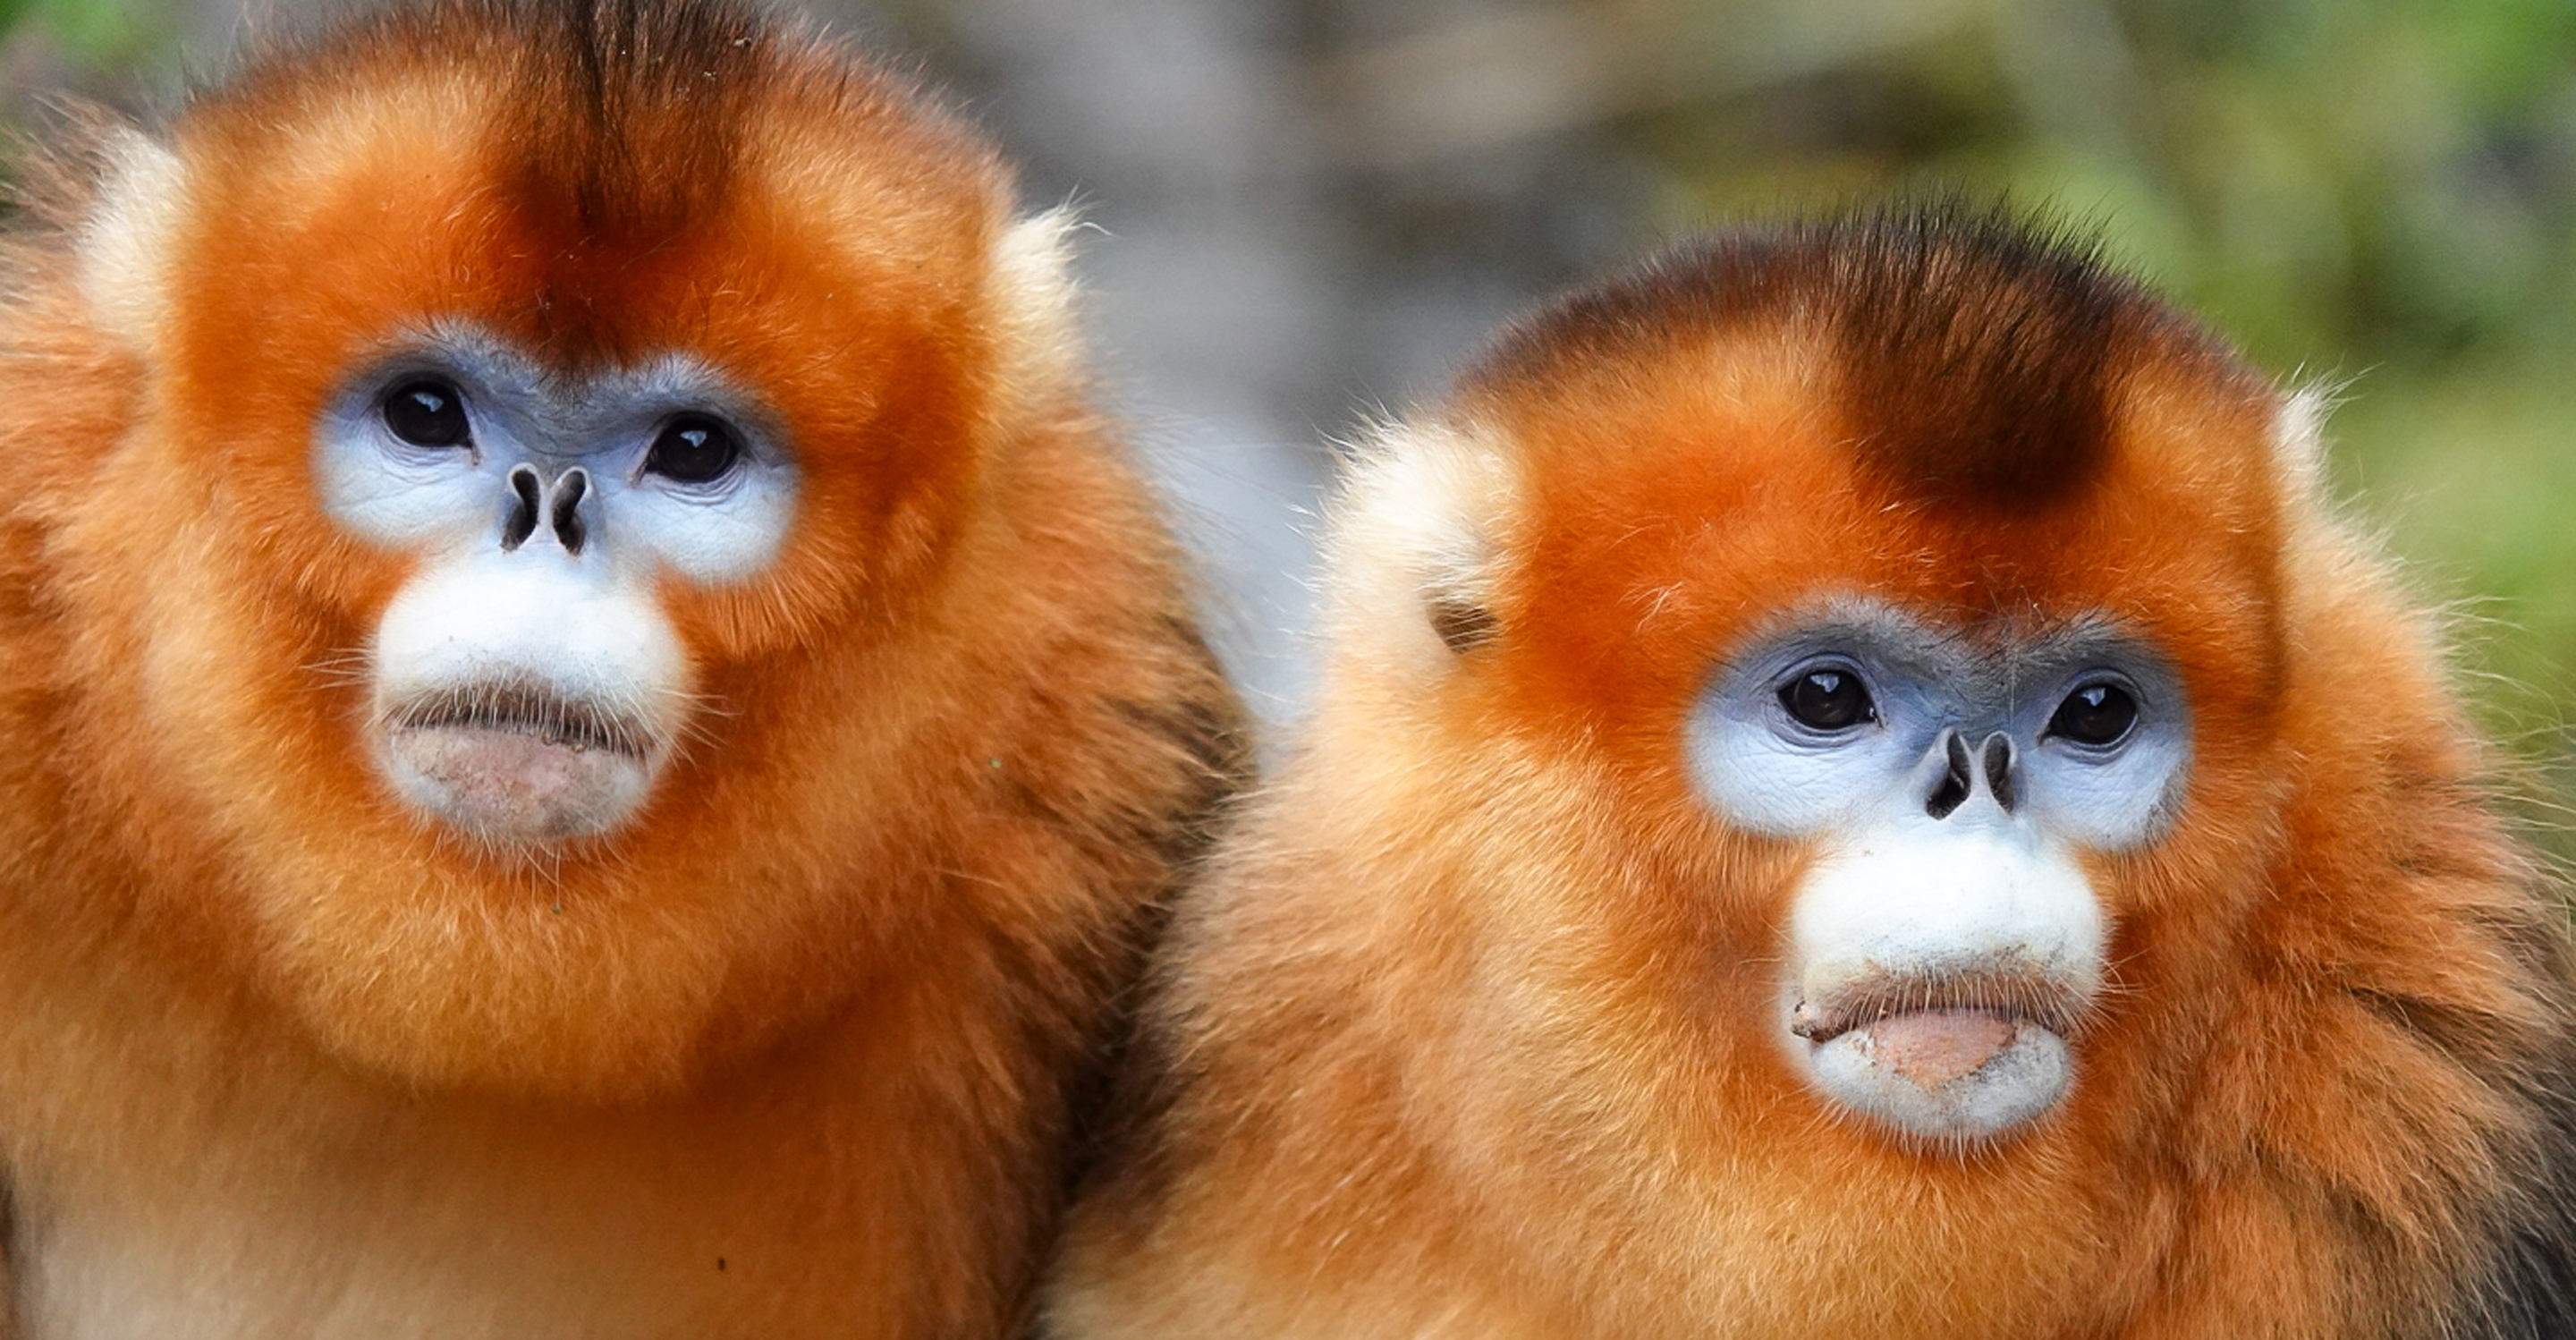 A close up of Golden Monkeys in China.